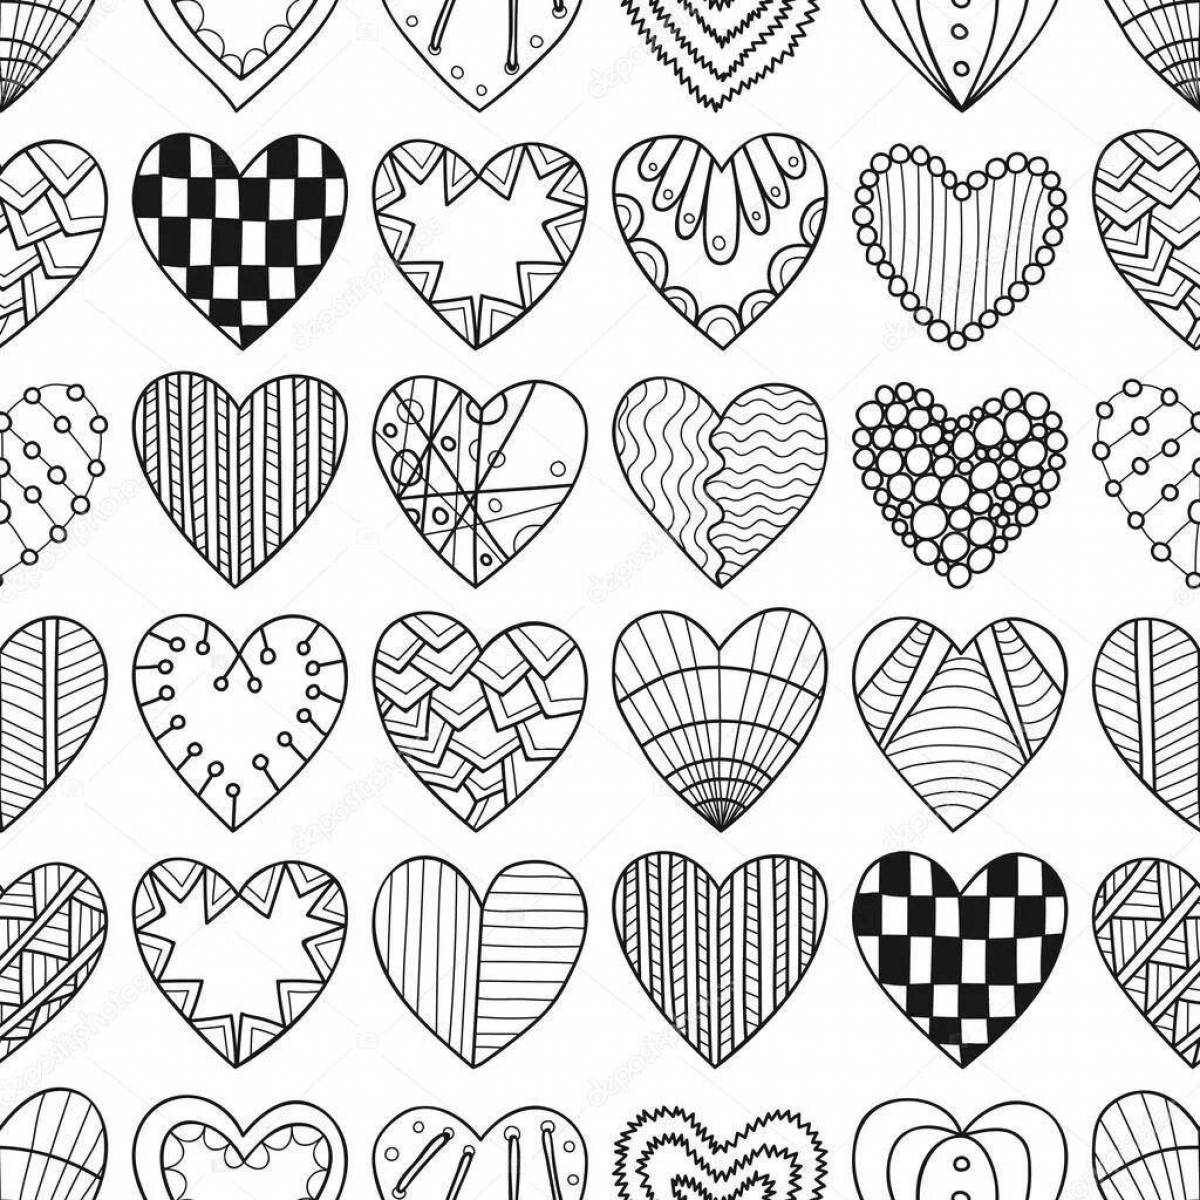 Flowering heart coloring page